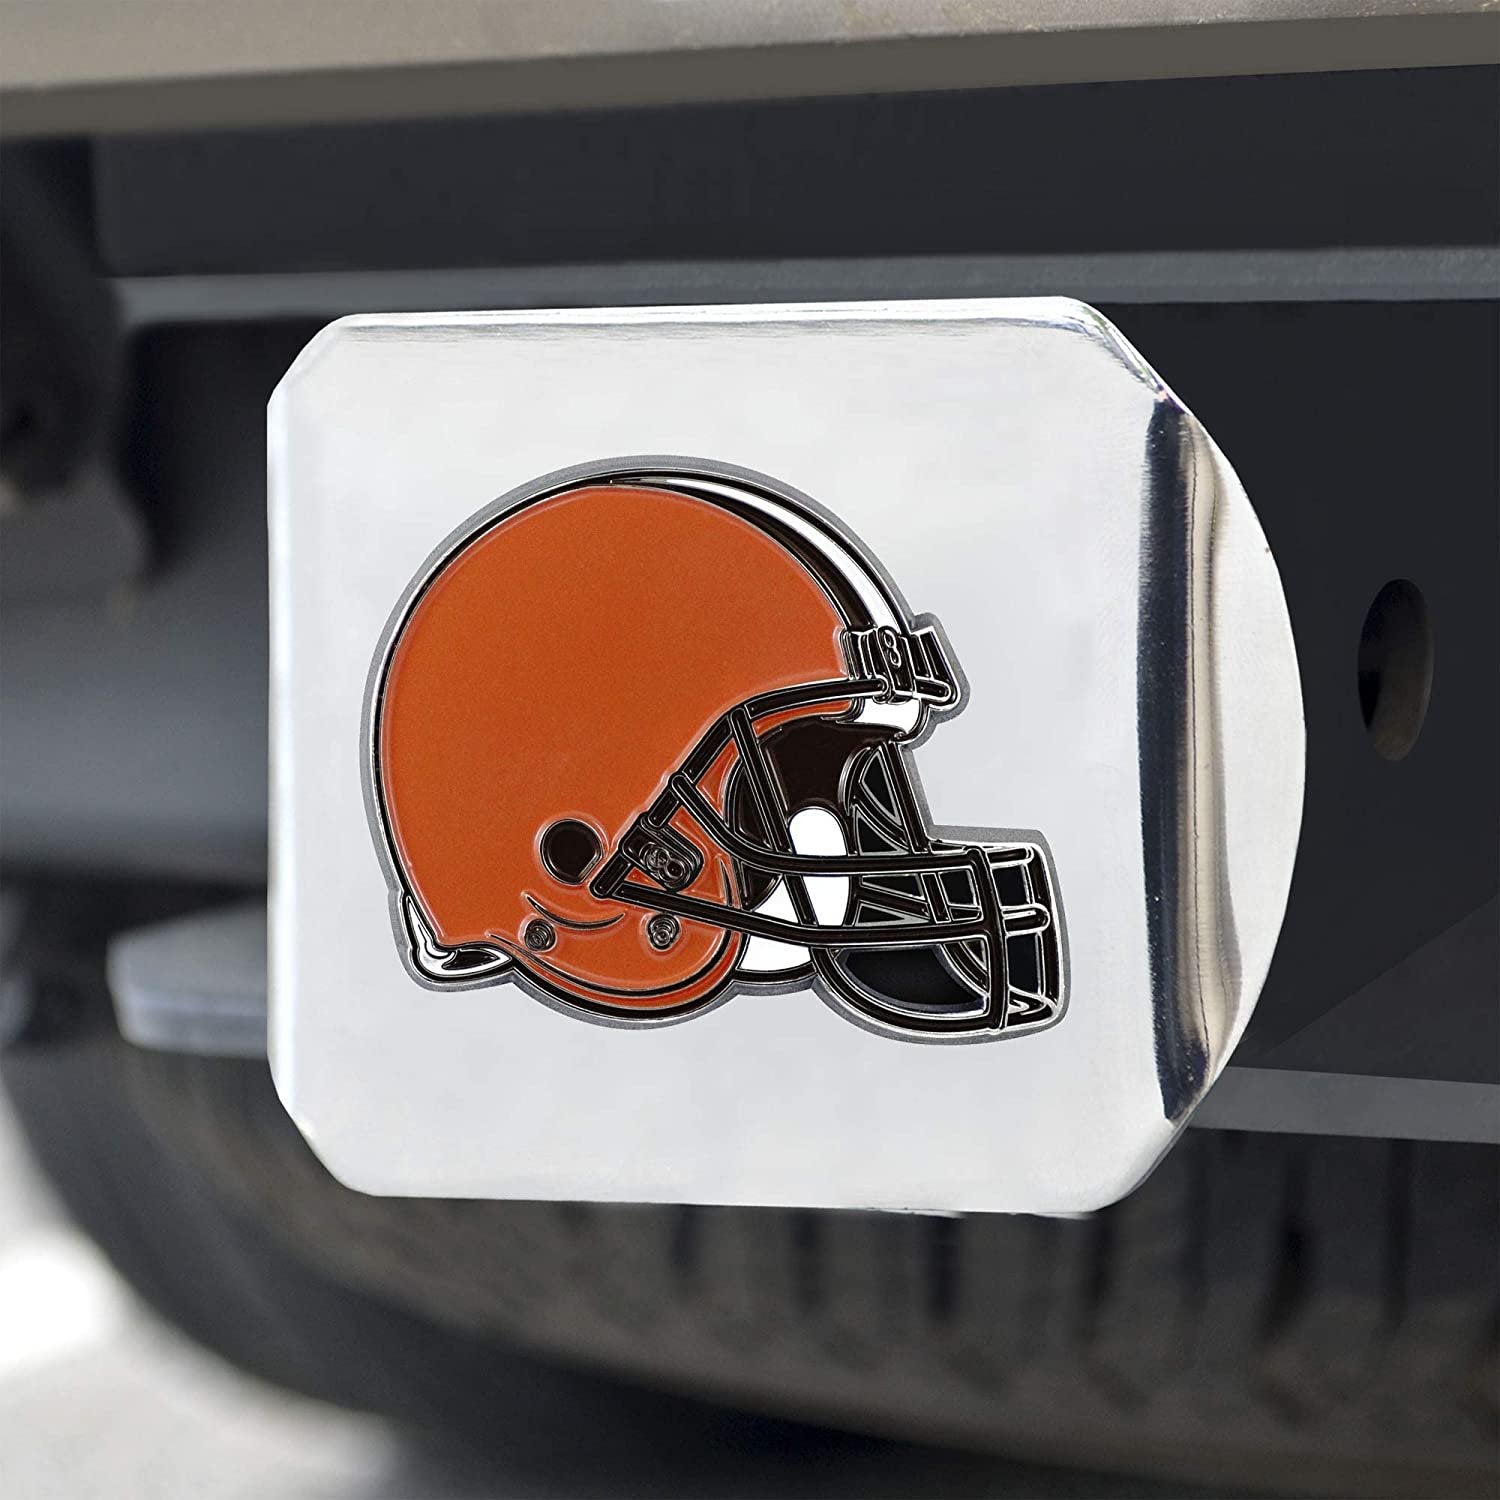 Cleveland Browns Hitch Cover Solid Metal with Raised Color Metal Emblem 2" Square Type IIIe